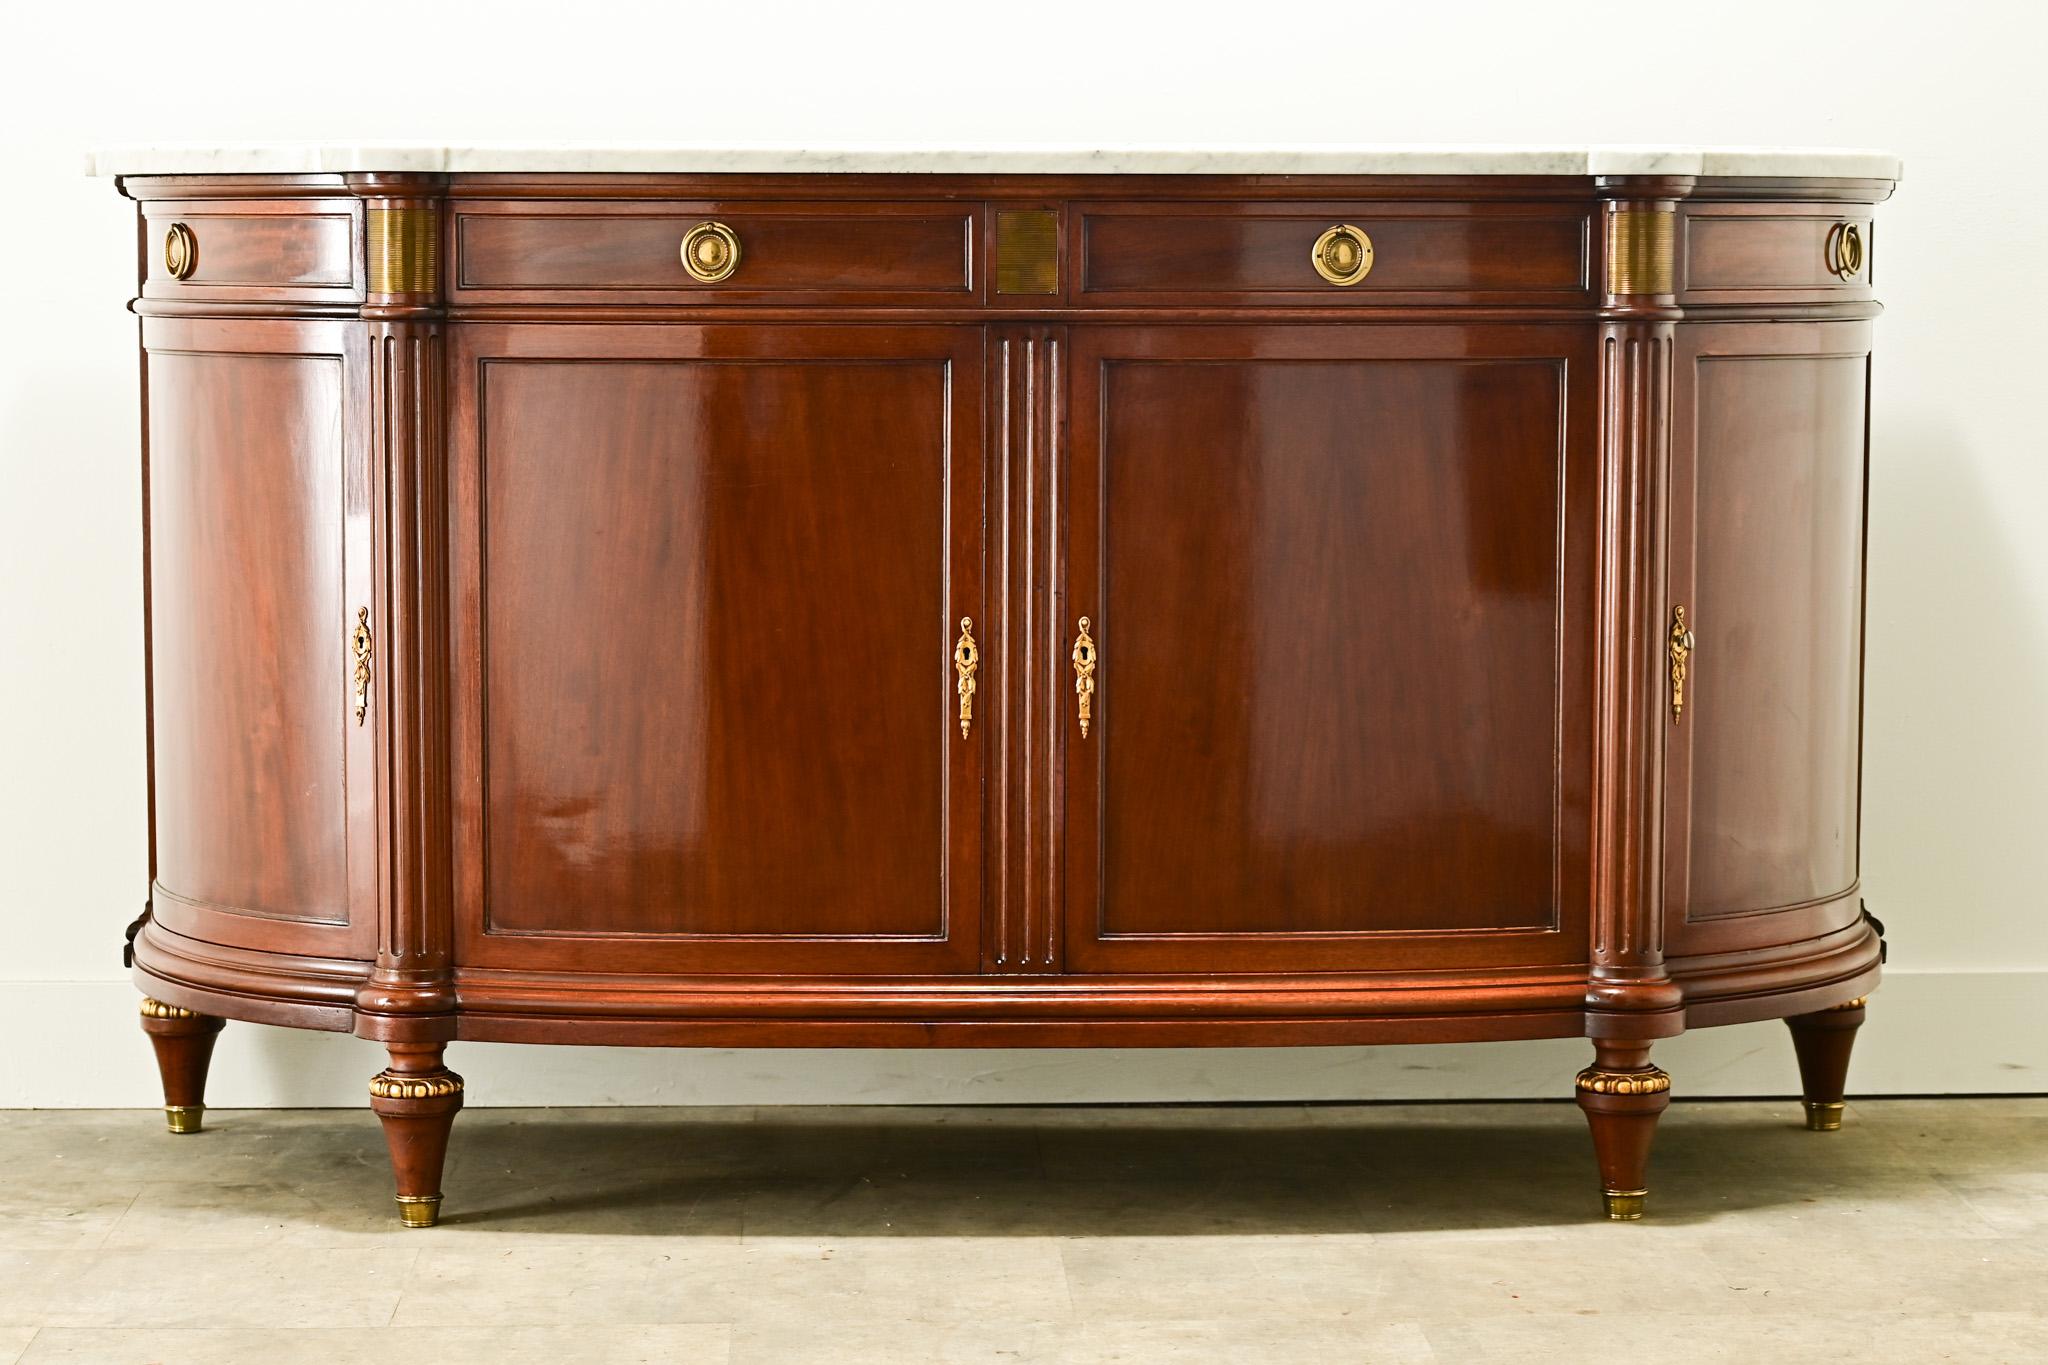 A refined Louis XVI style demilune shaped enfilade made in France. The original shaped white marble top rests over its mahogany base. The center of the cabinet has two drawers that open with brass ring pulls and two paneled doors, flanked with